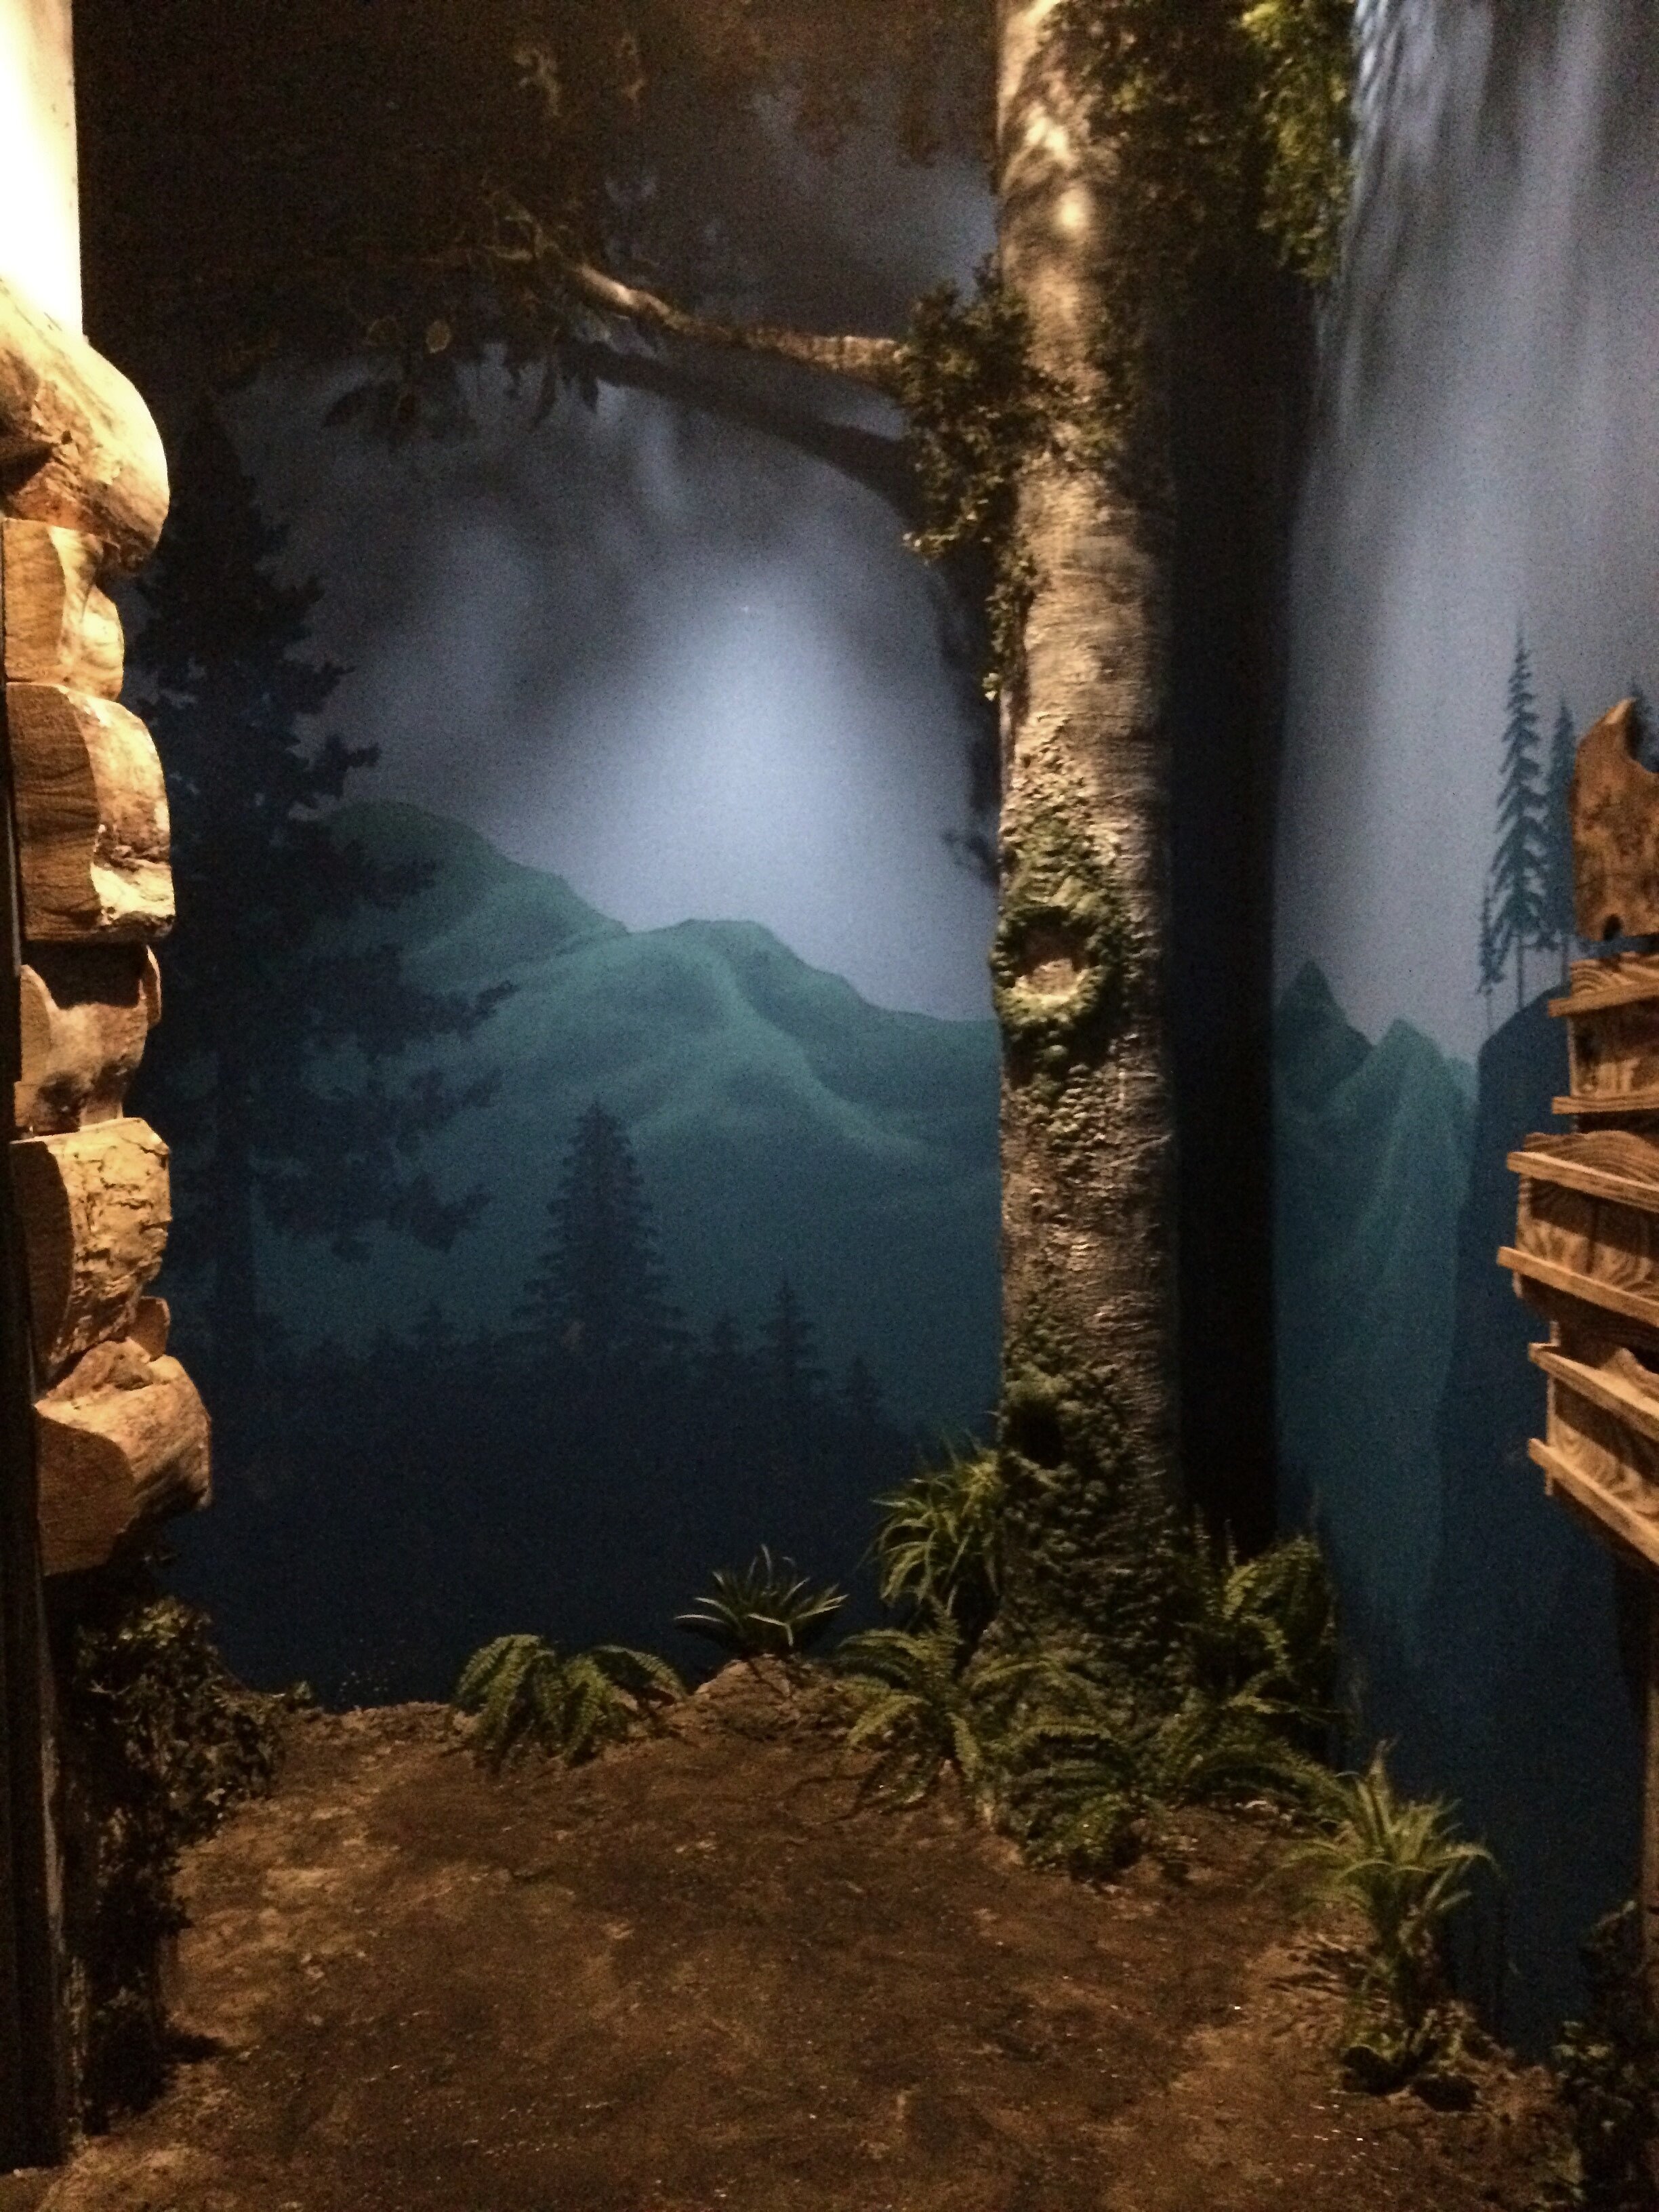 Sculpted Tree & Mural for "Gold Rush" Room/ Escape Game